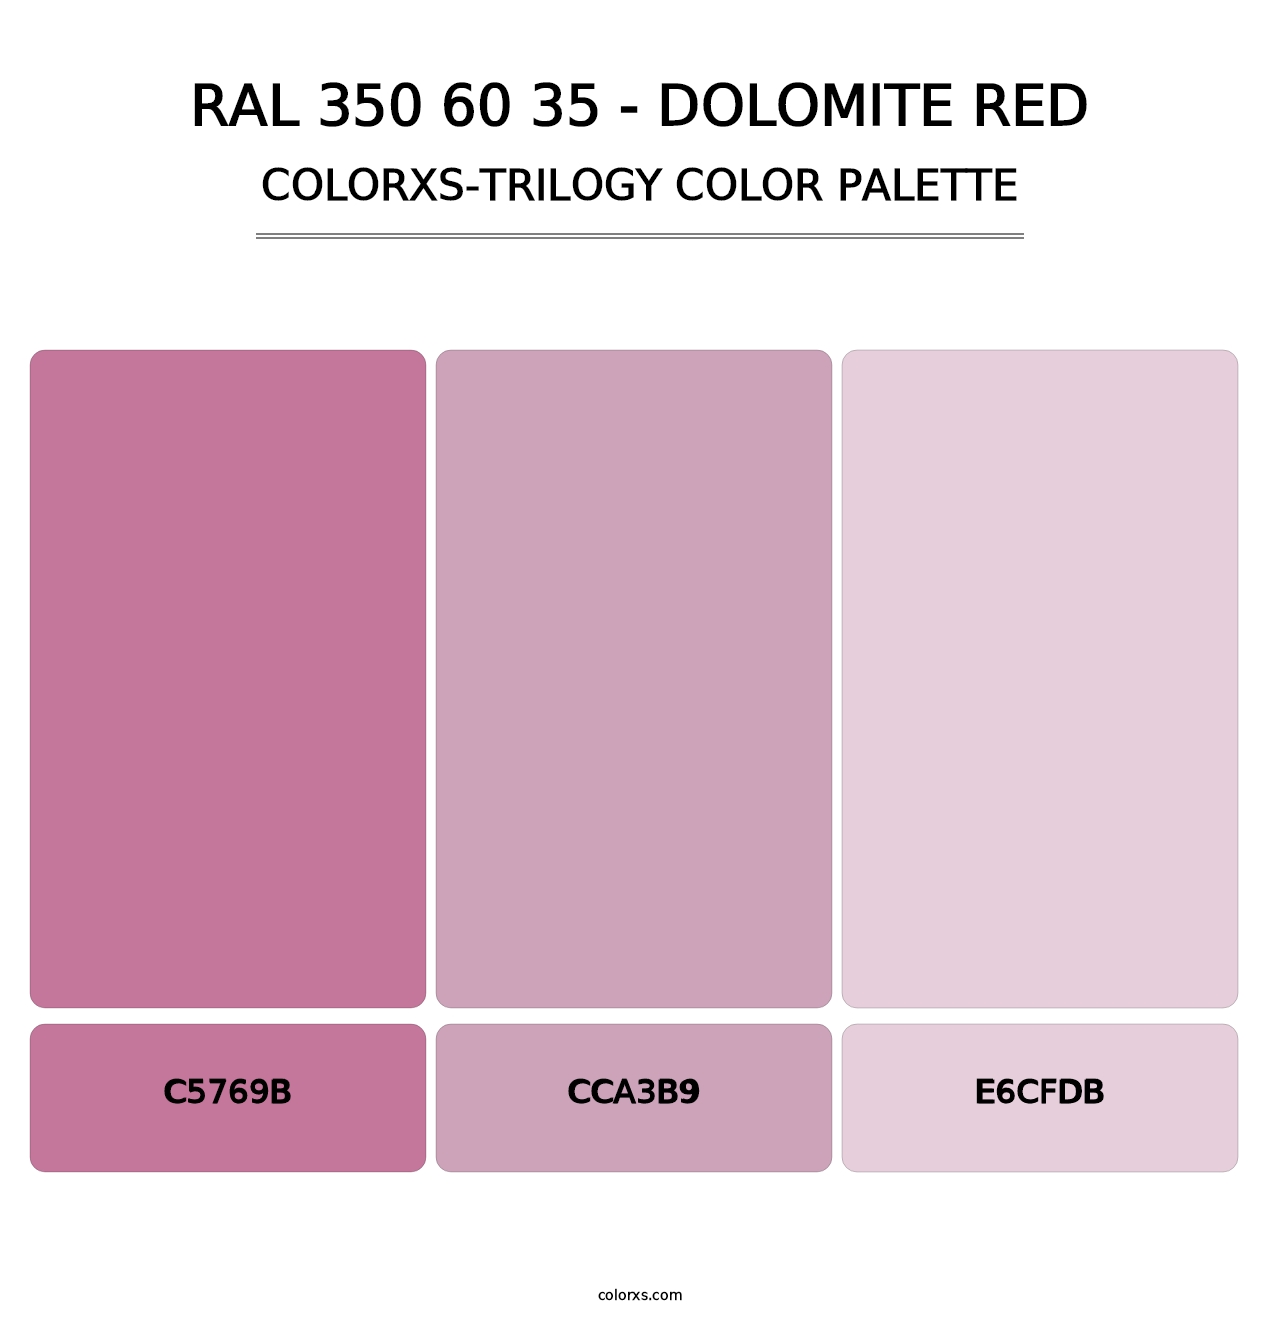 RAL 350 60 35 - Dolomite Red - Colorxs Trilogy Palette